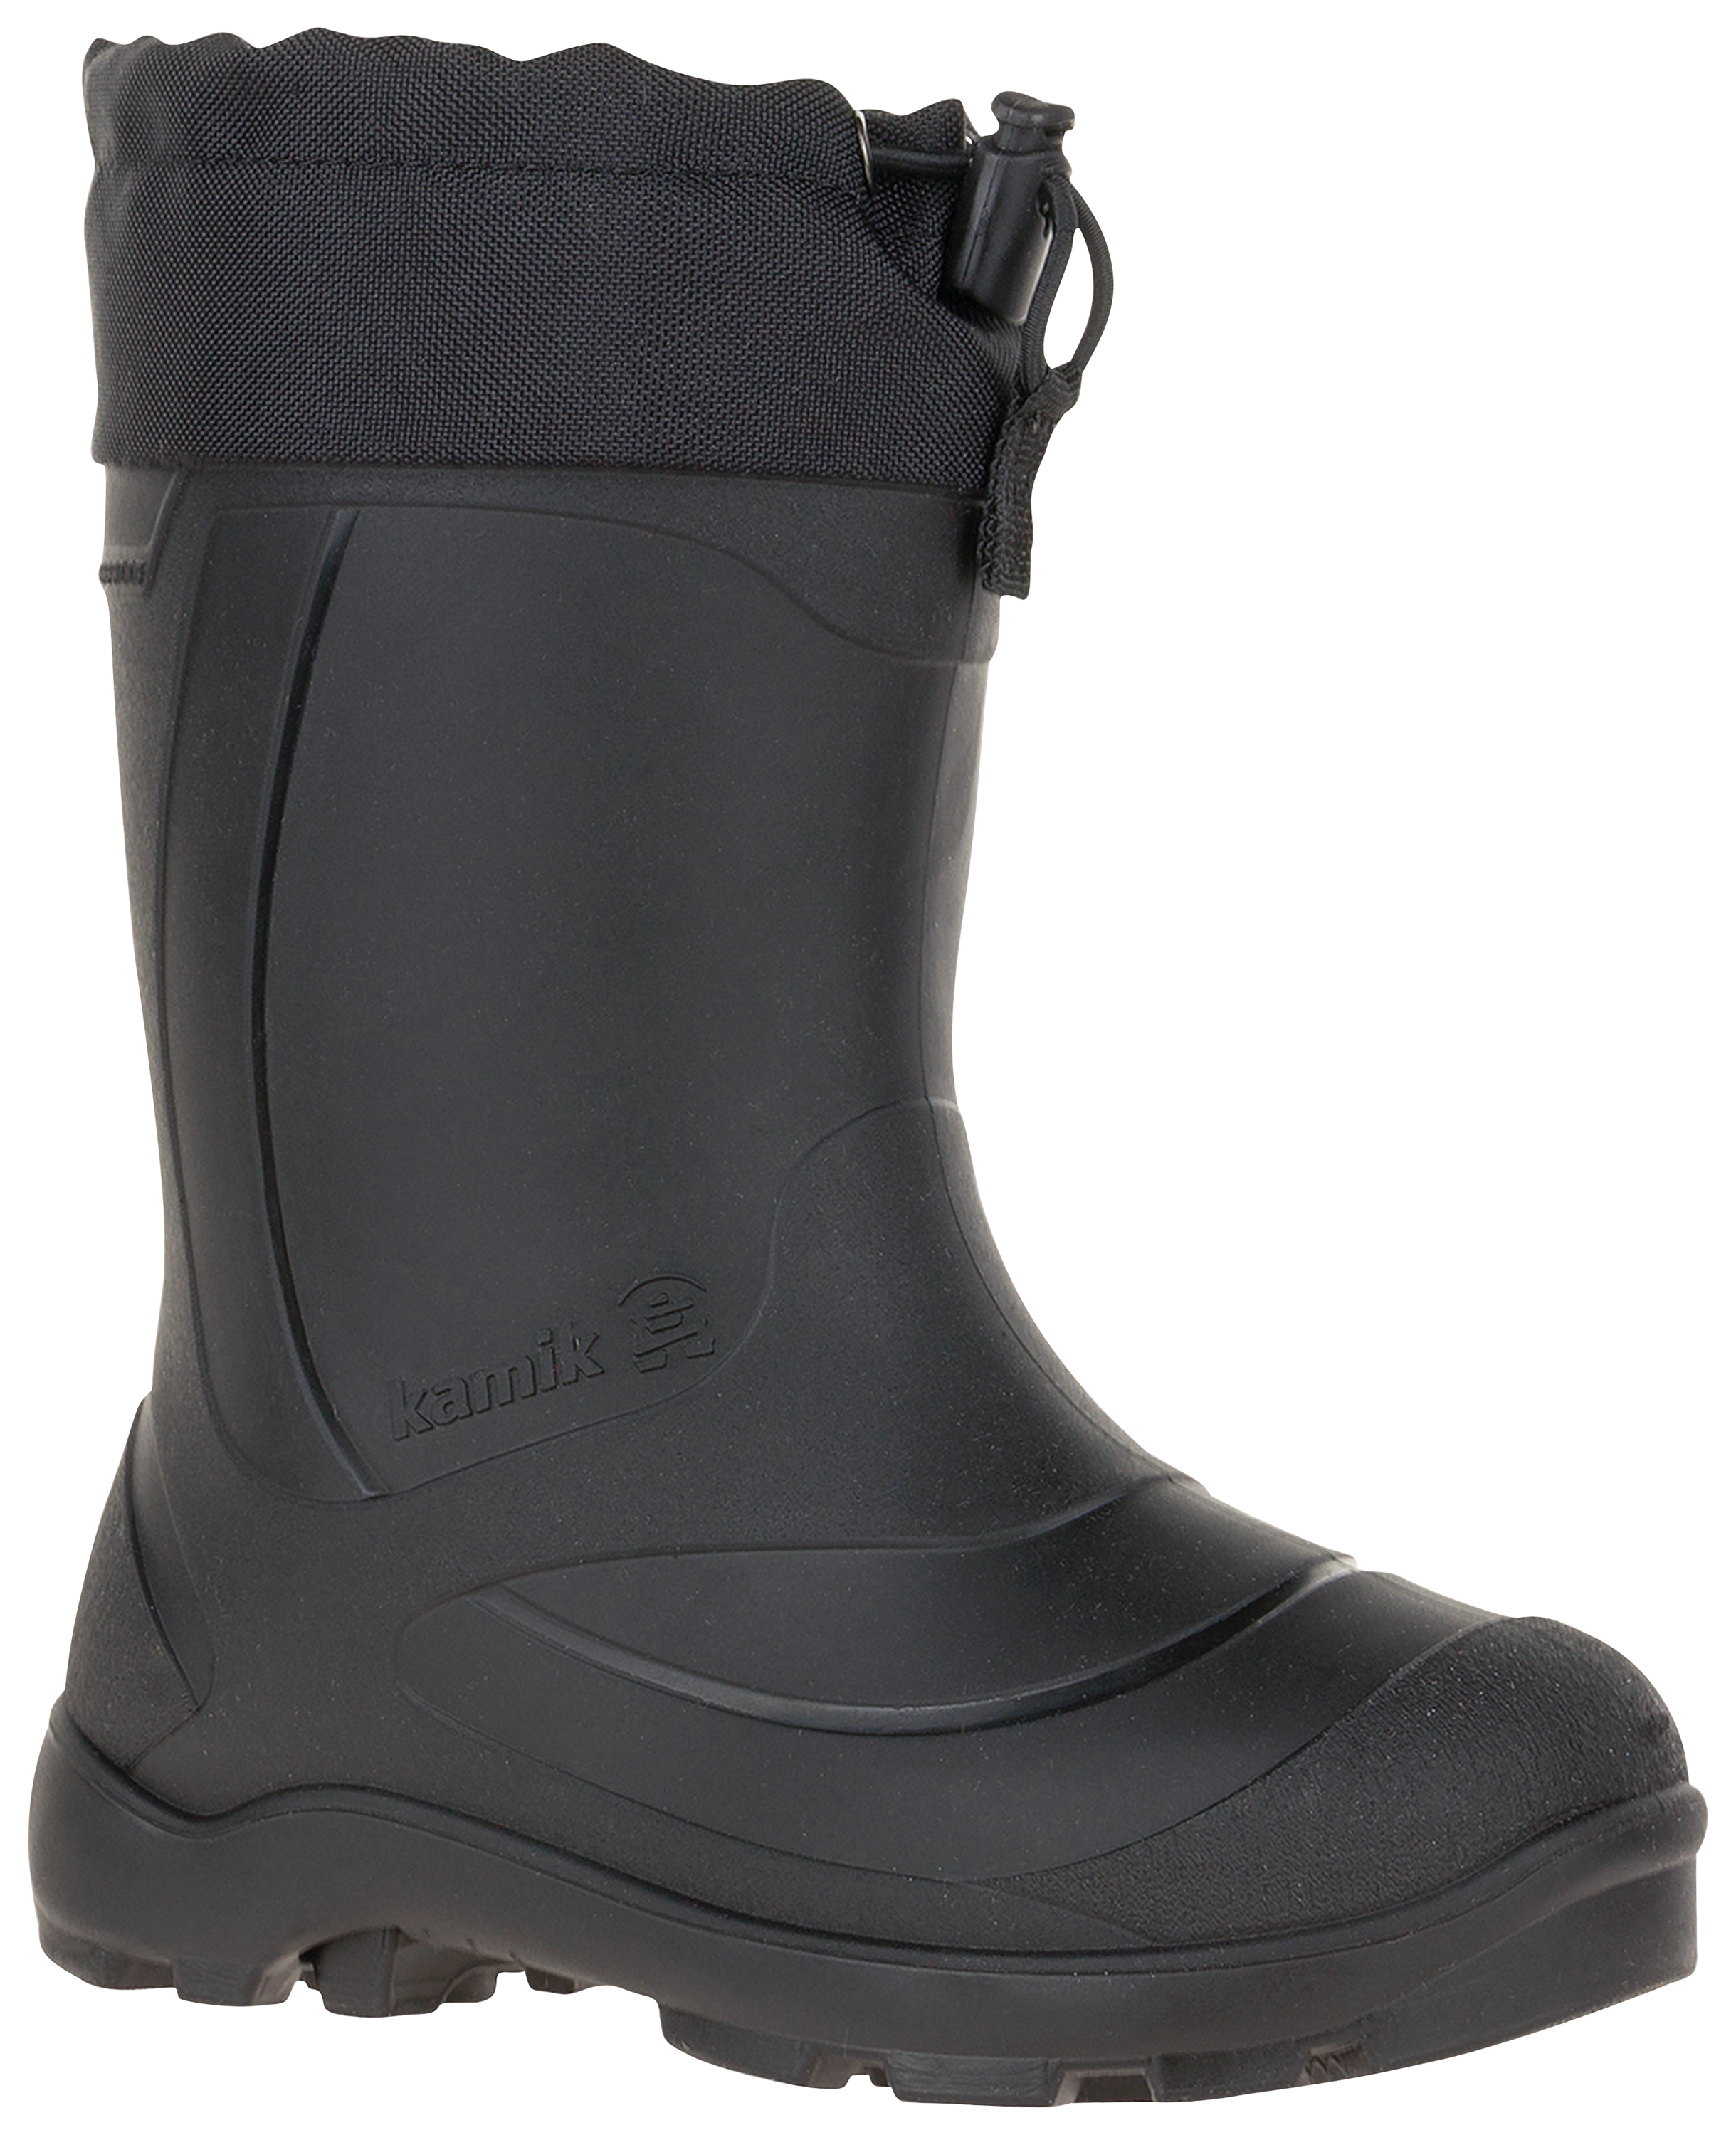 Kamik Snobuster 1 Winter Boots for Toddlers or Kids | Bass Pro Shops